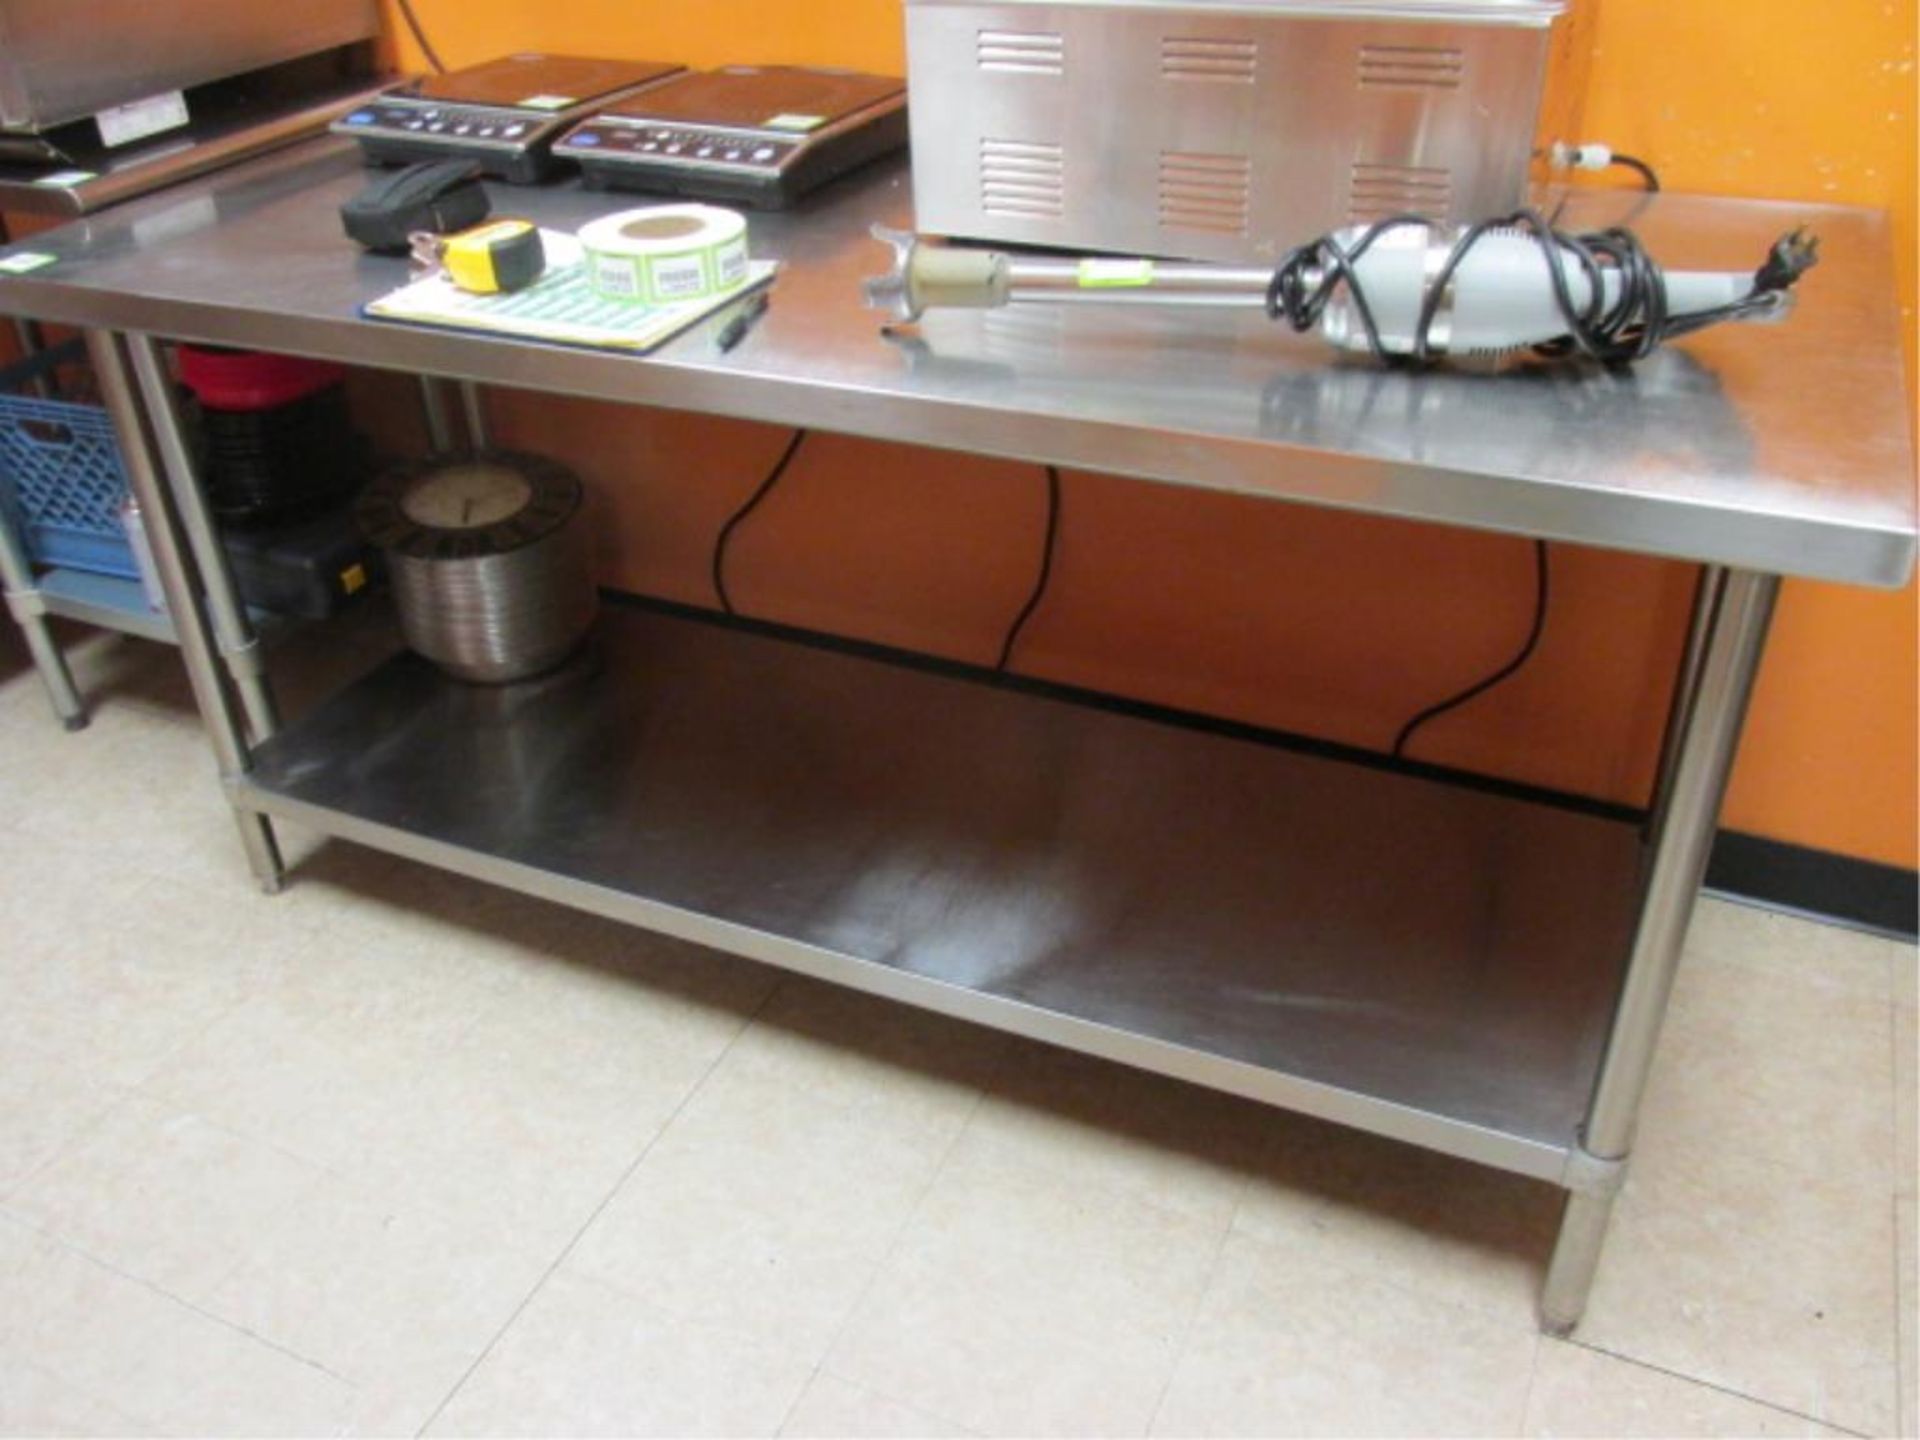 Stainless Steel Prep Table, 30" X 72". HIT# 2234852. Loc: Kitchen Asset Located at 143 Kent Street, - Image 2 of 2